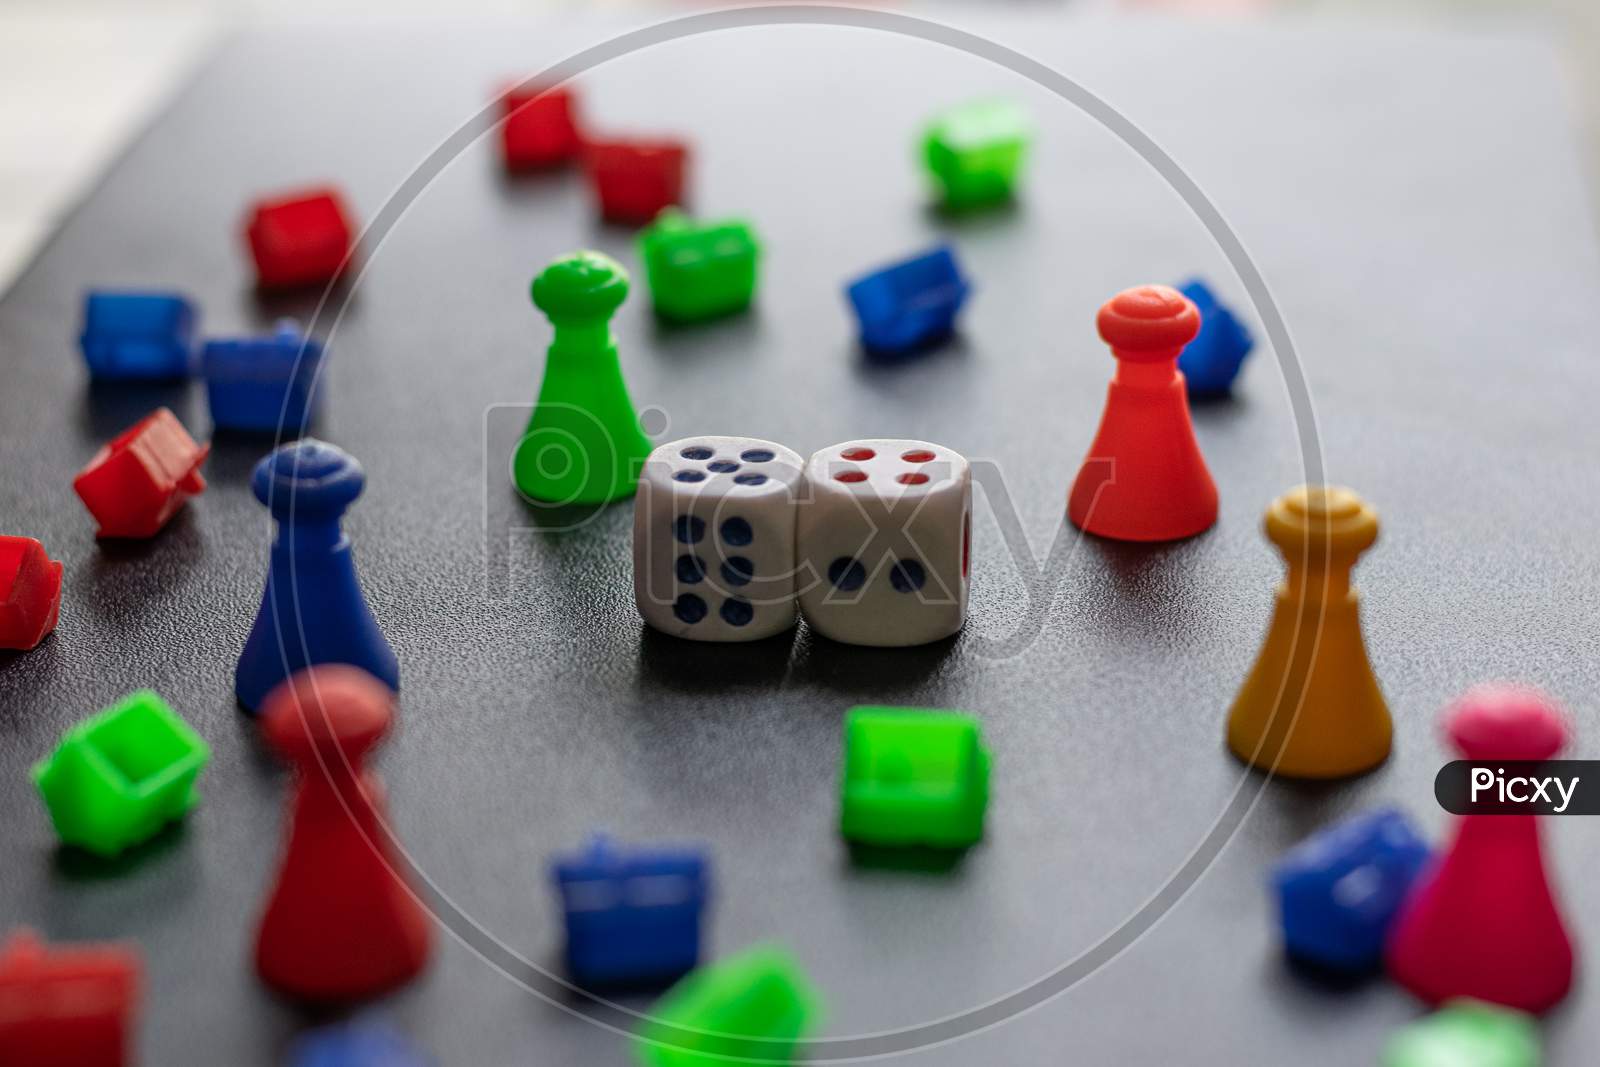 Colorful Plastic game pieces and dice used to play in monopoly game